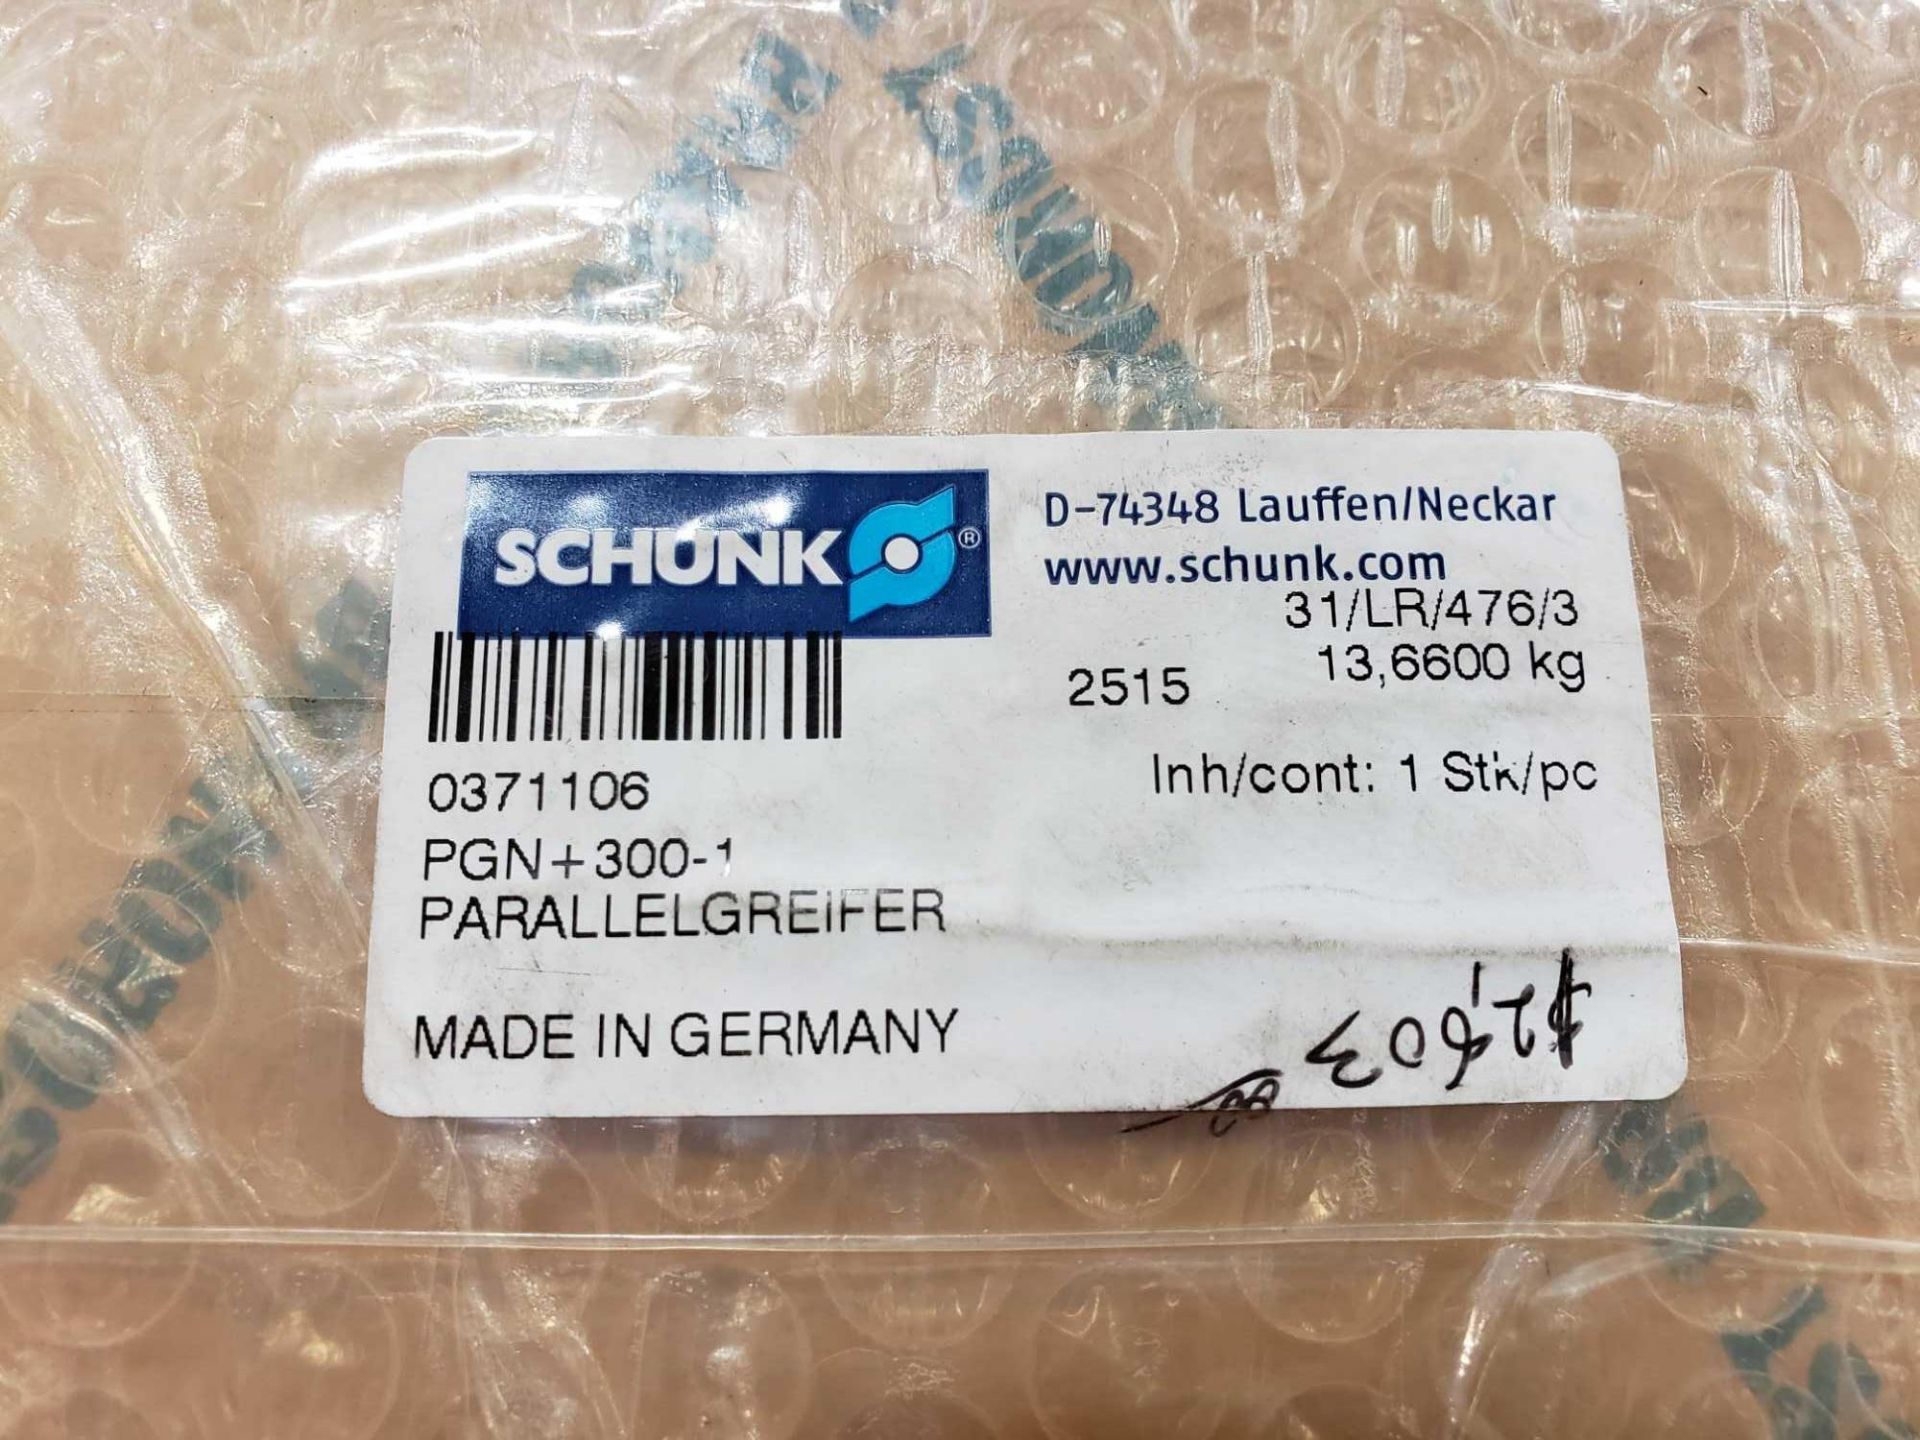 Schunk parallel gripper model PGN+300-1. New in package. - Image 3 of 3